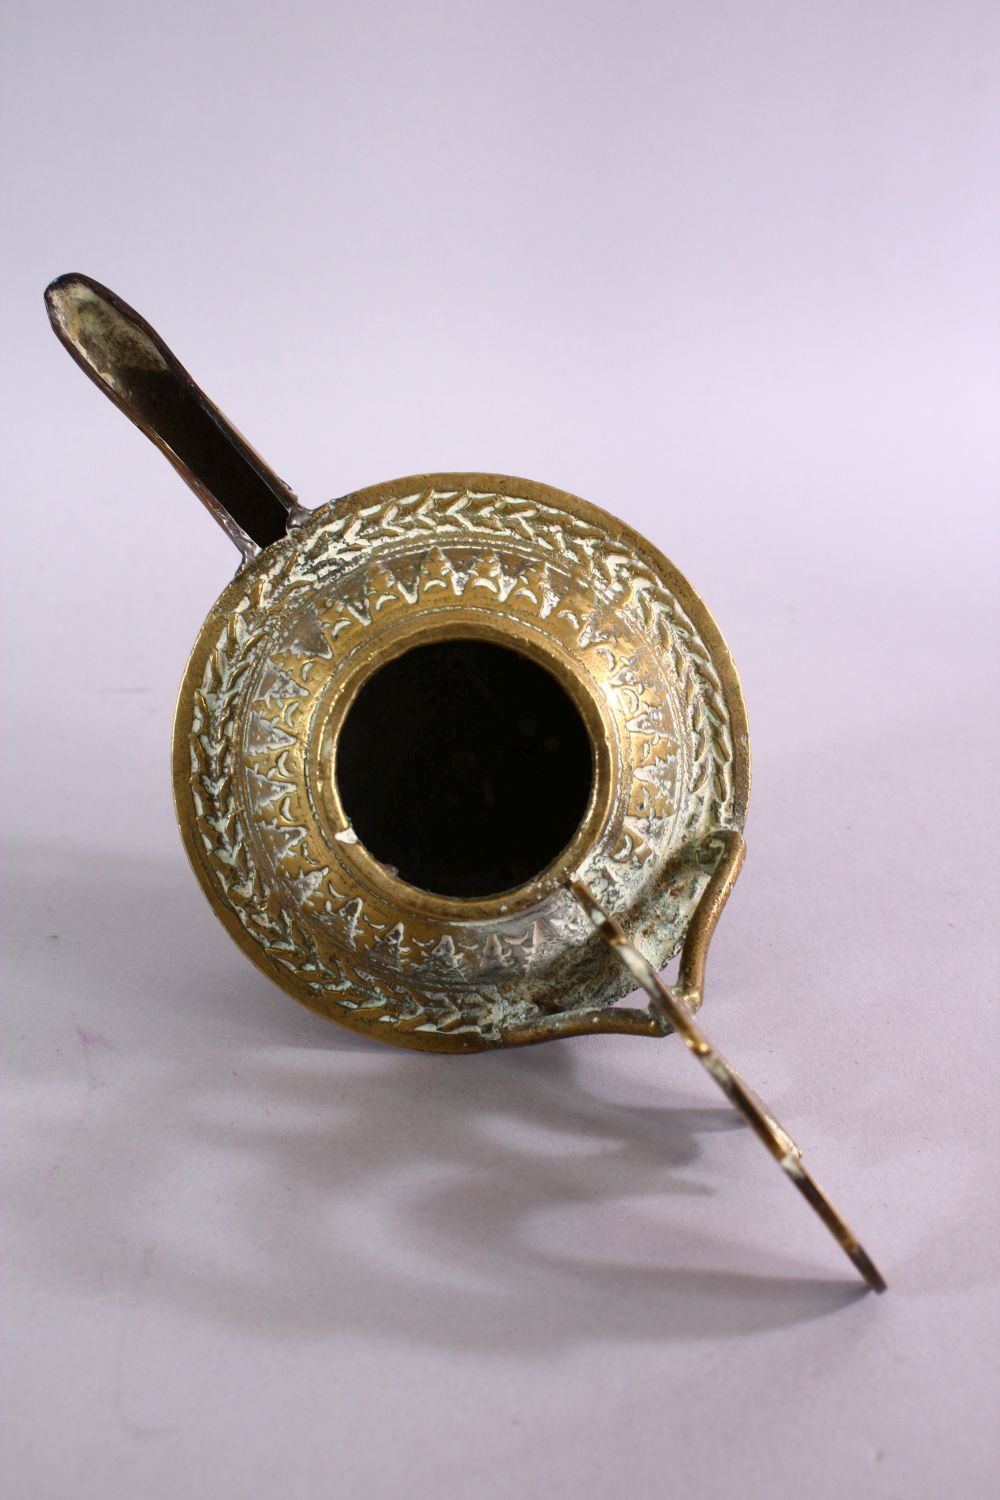 AN UNUSUAL EARLY ISLAMIC POSSIBLY ANDALUSIAN SPANISH BRASS OIL LAMP, with moulded decoration, 17cm - Image 5 of 6